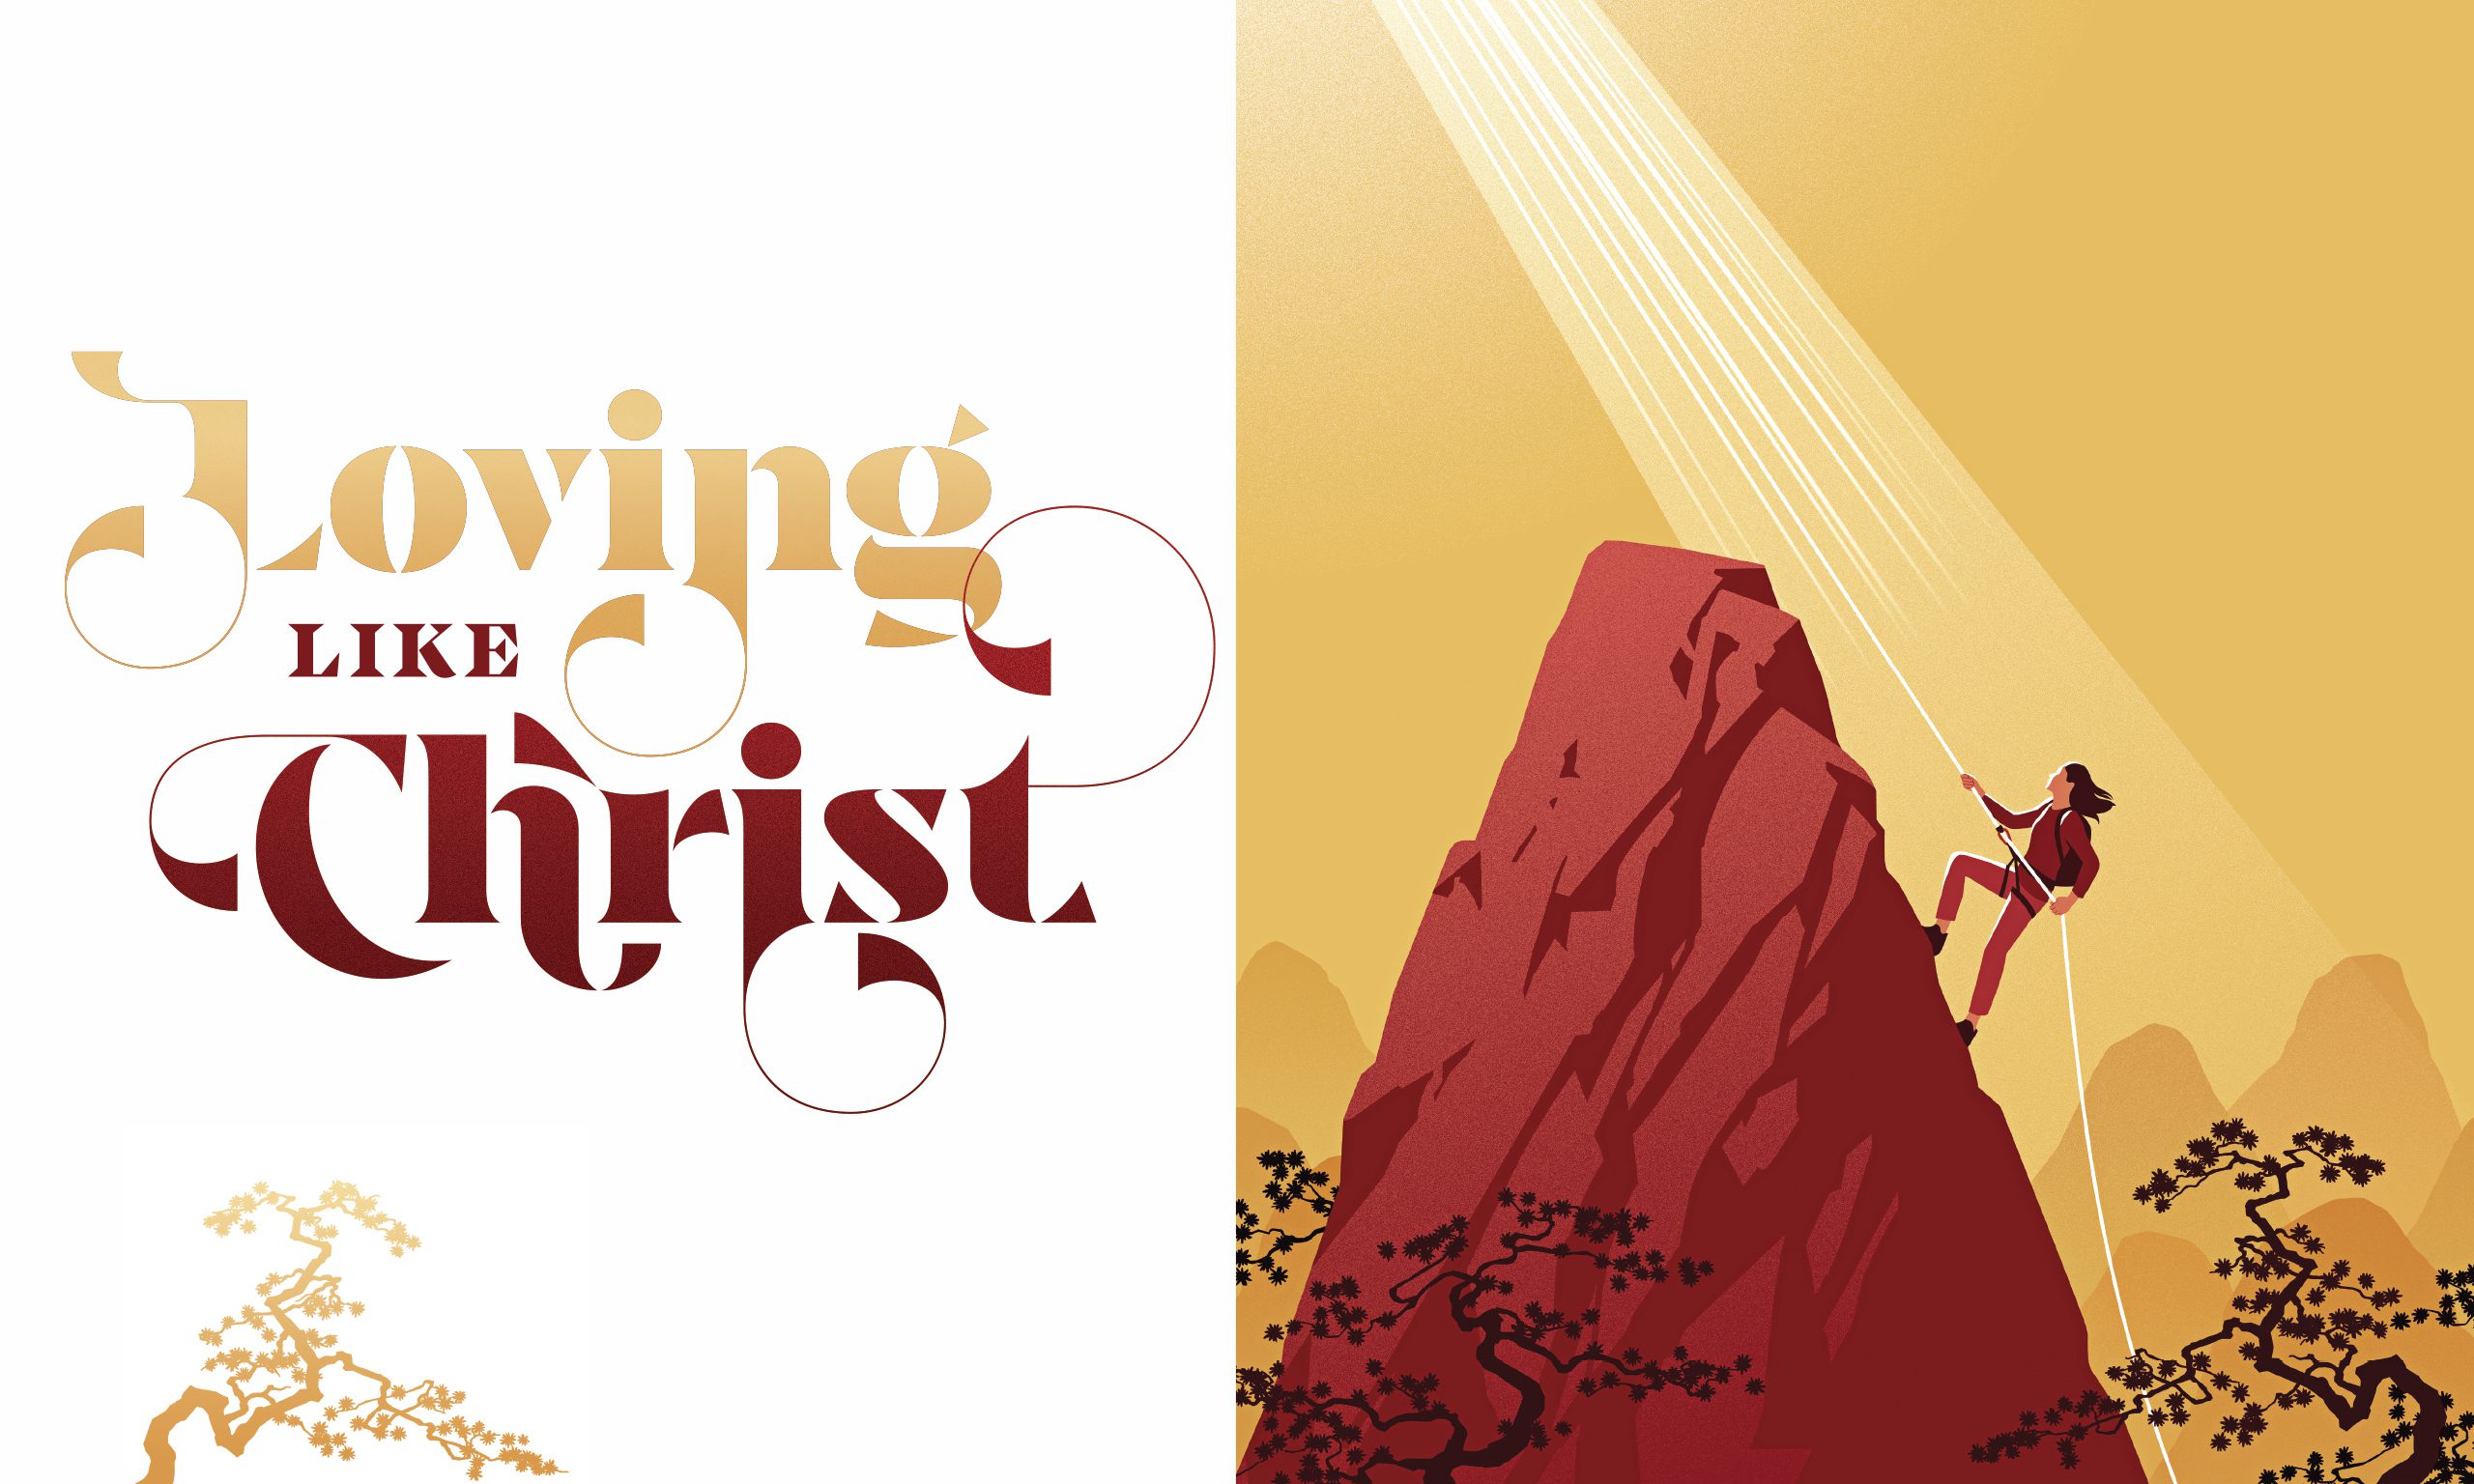 An illustrated title that reads "Loving like Christ" and features someone climbing up a mountain.